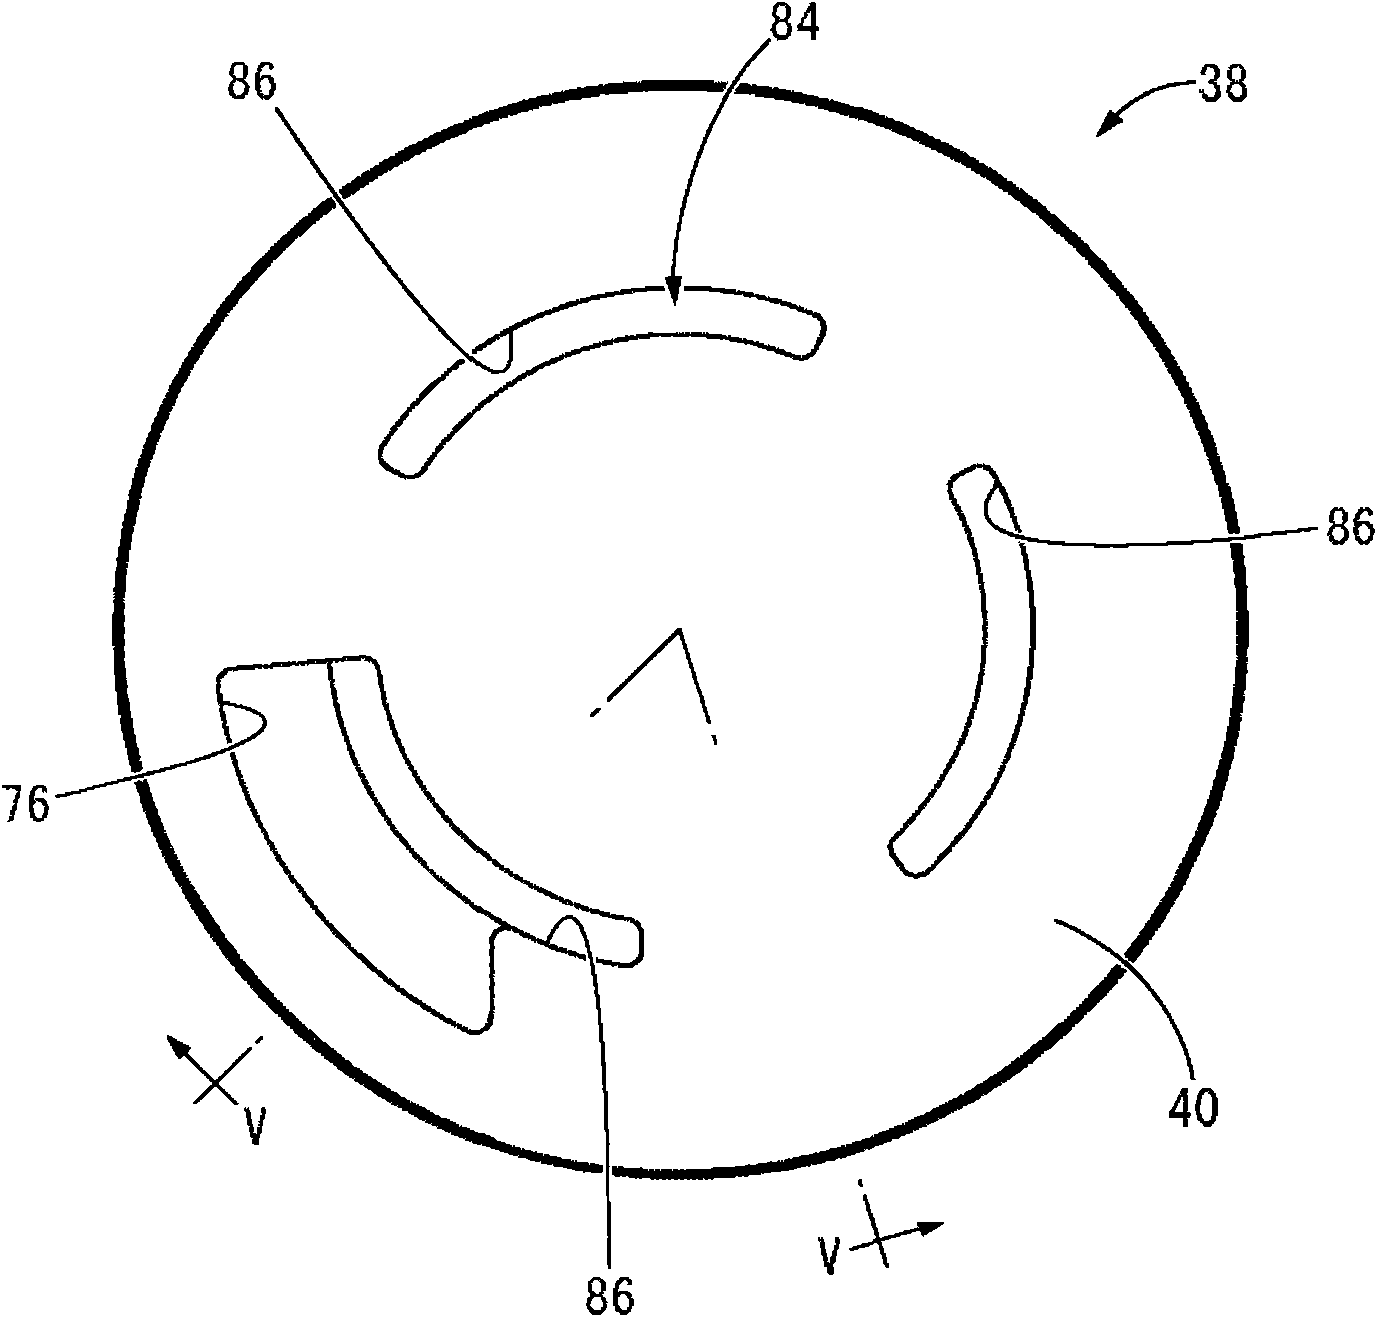 Fluid-filled type vibration damping device